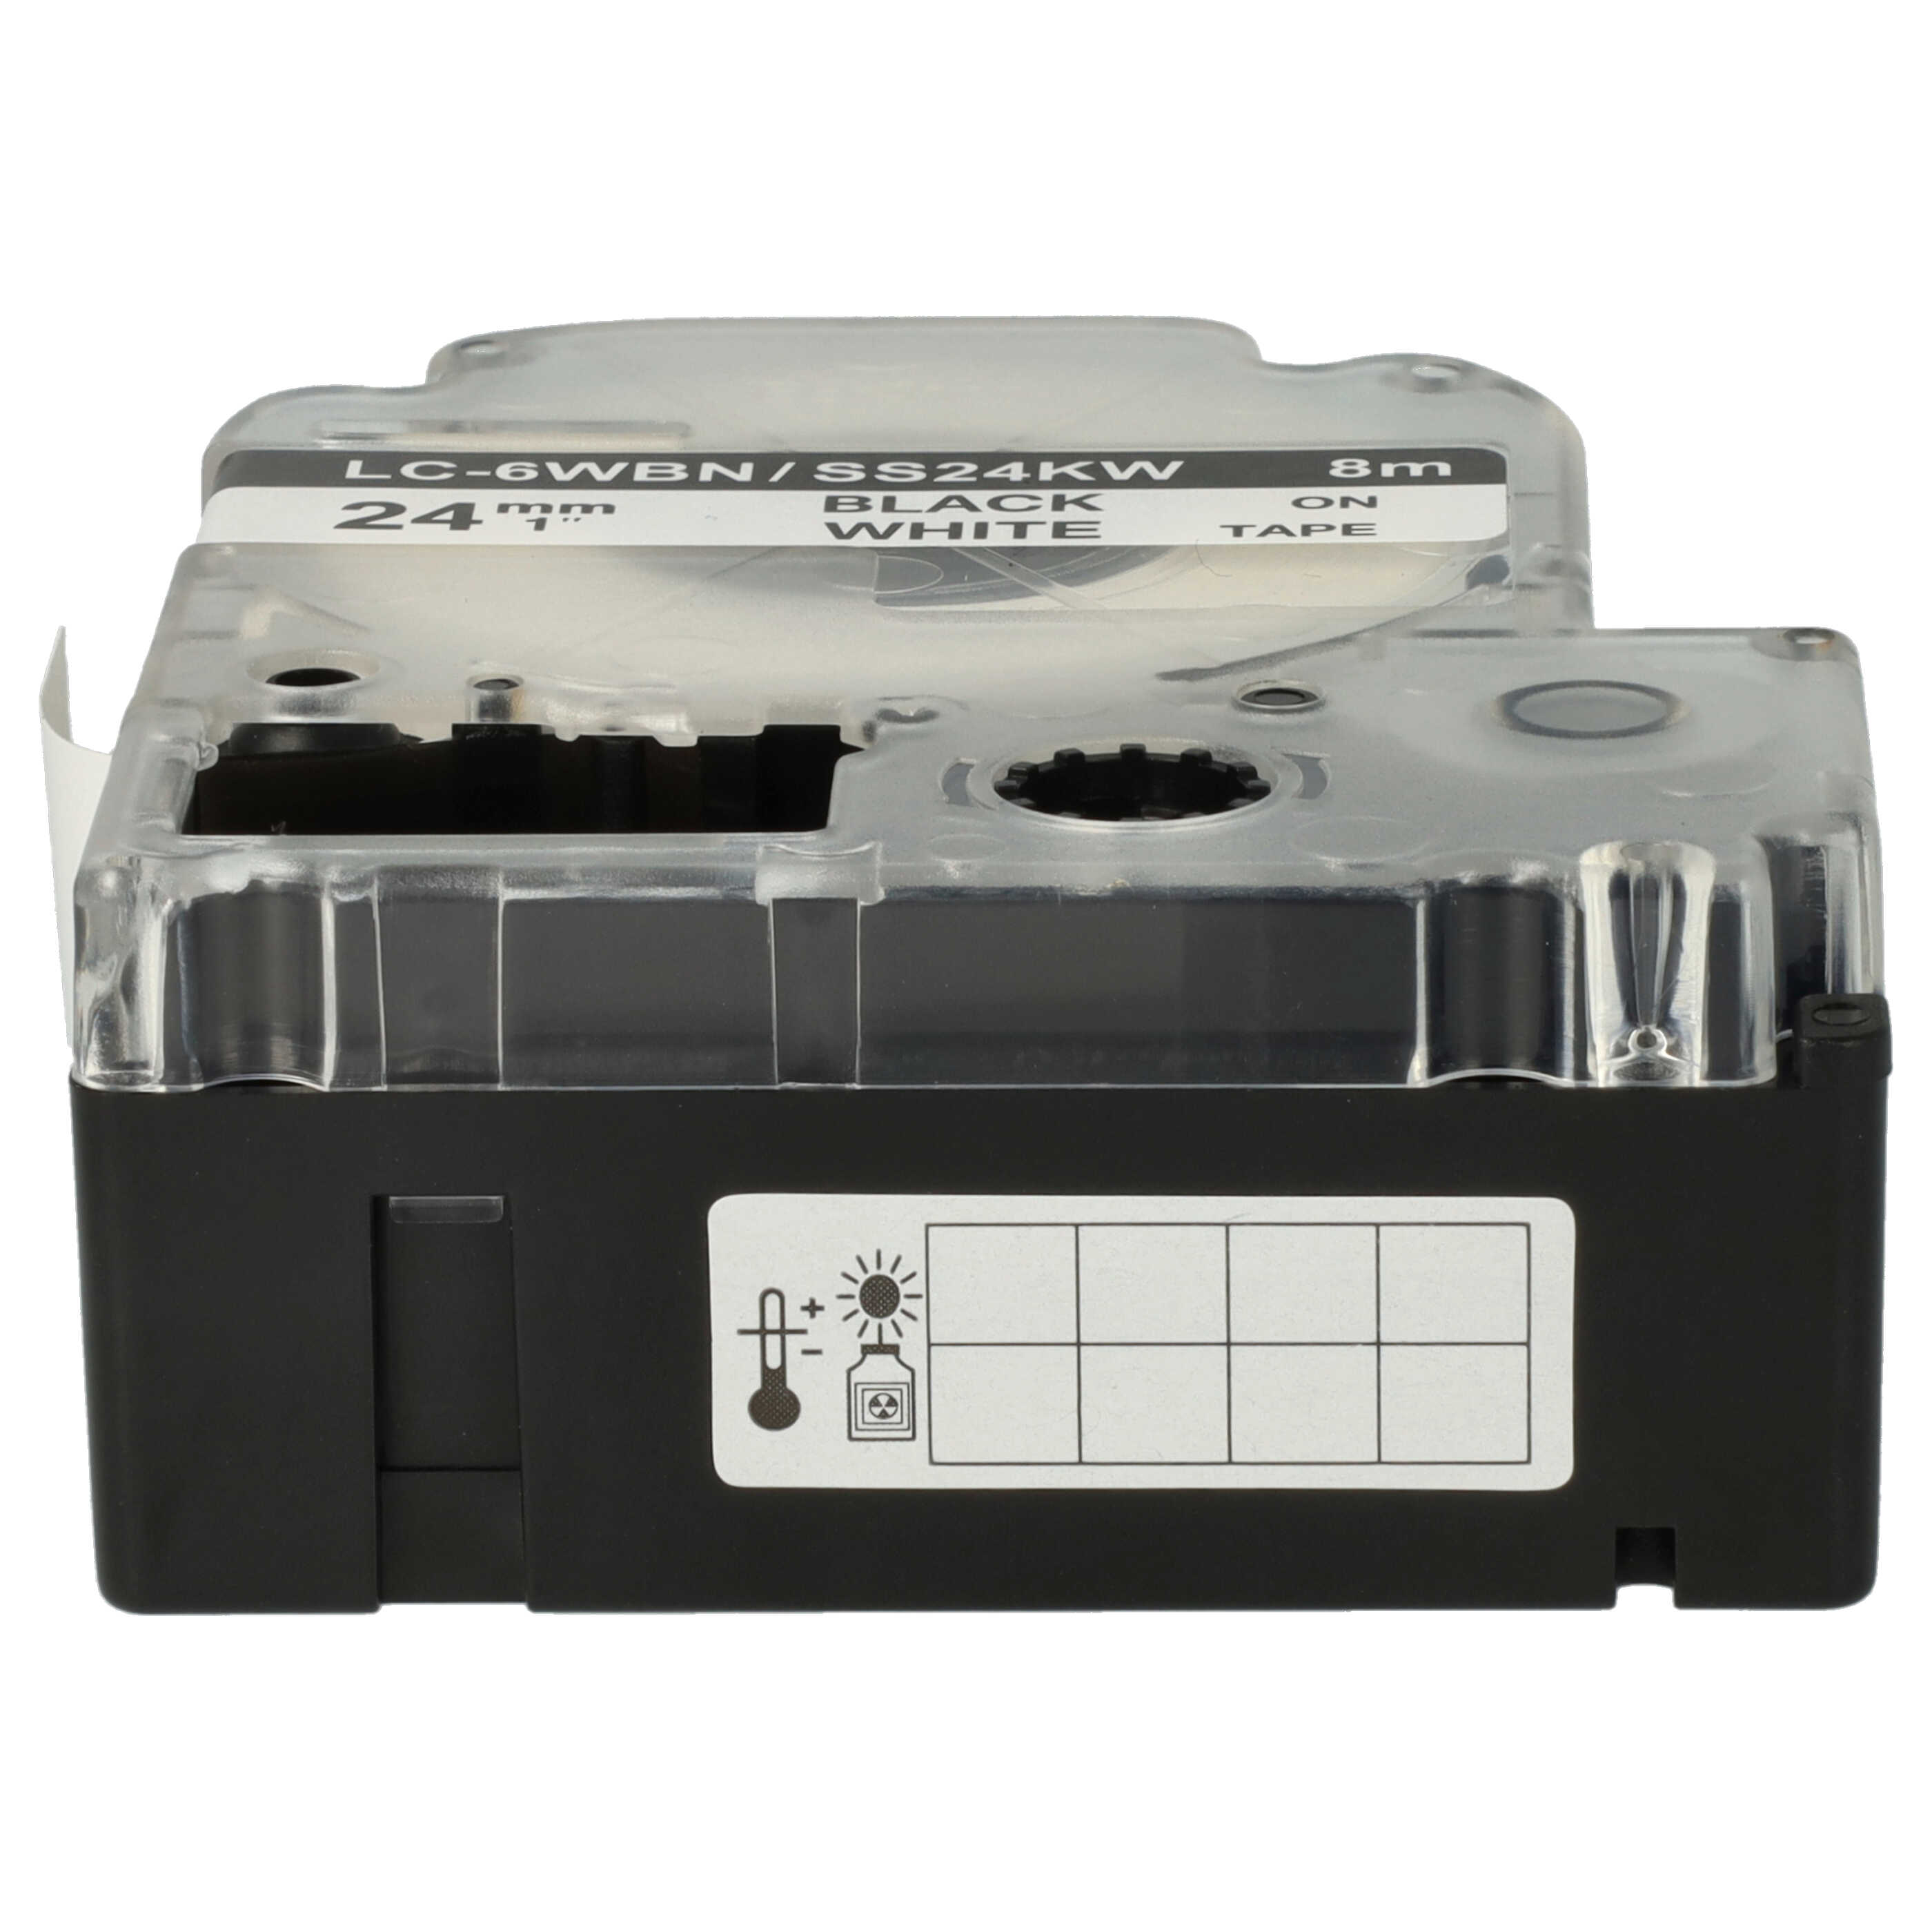 10x Label Tape as Replacement for Epson LC-6WBN - 24 mm Black to White